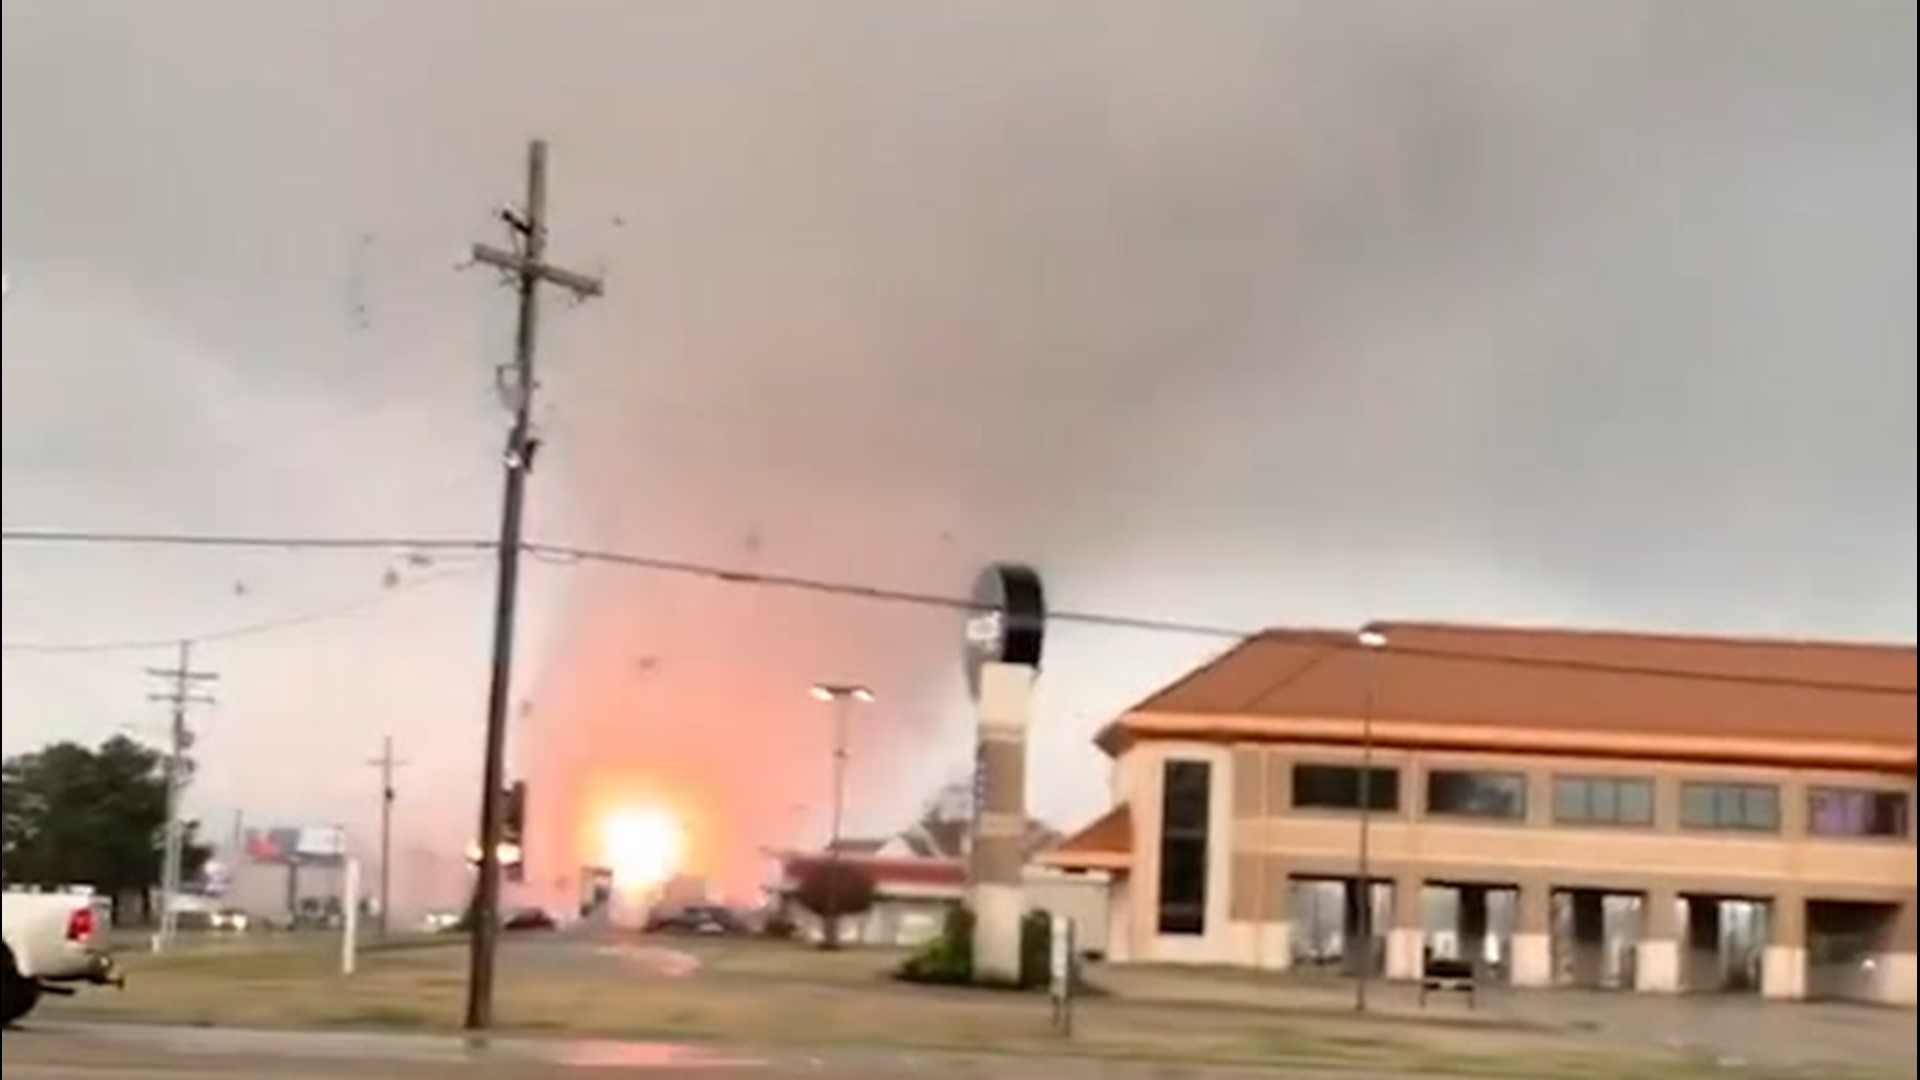 This tornado terrorized Jonesboro, Arkansas, sending sparks flying from power lines on March 28. Other debris can be seen flying in the air as well.